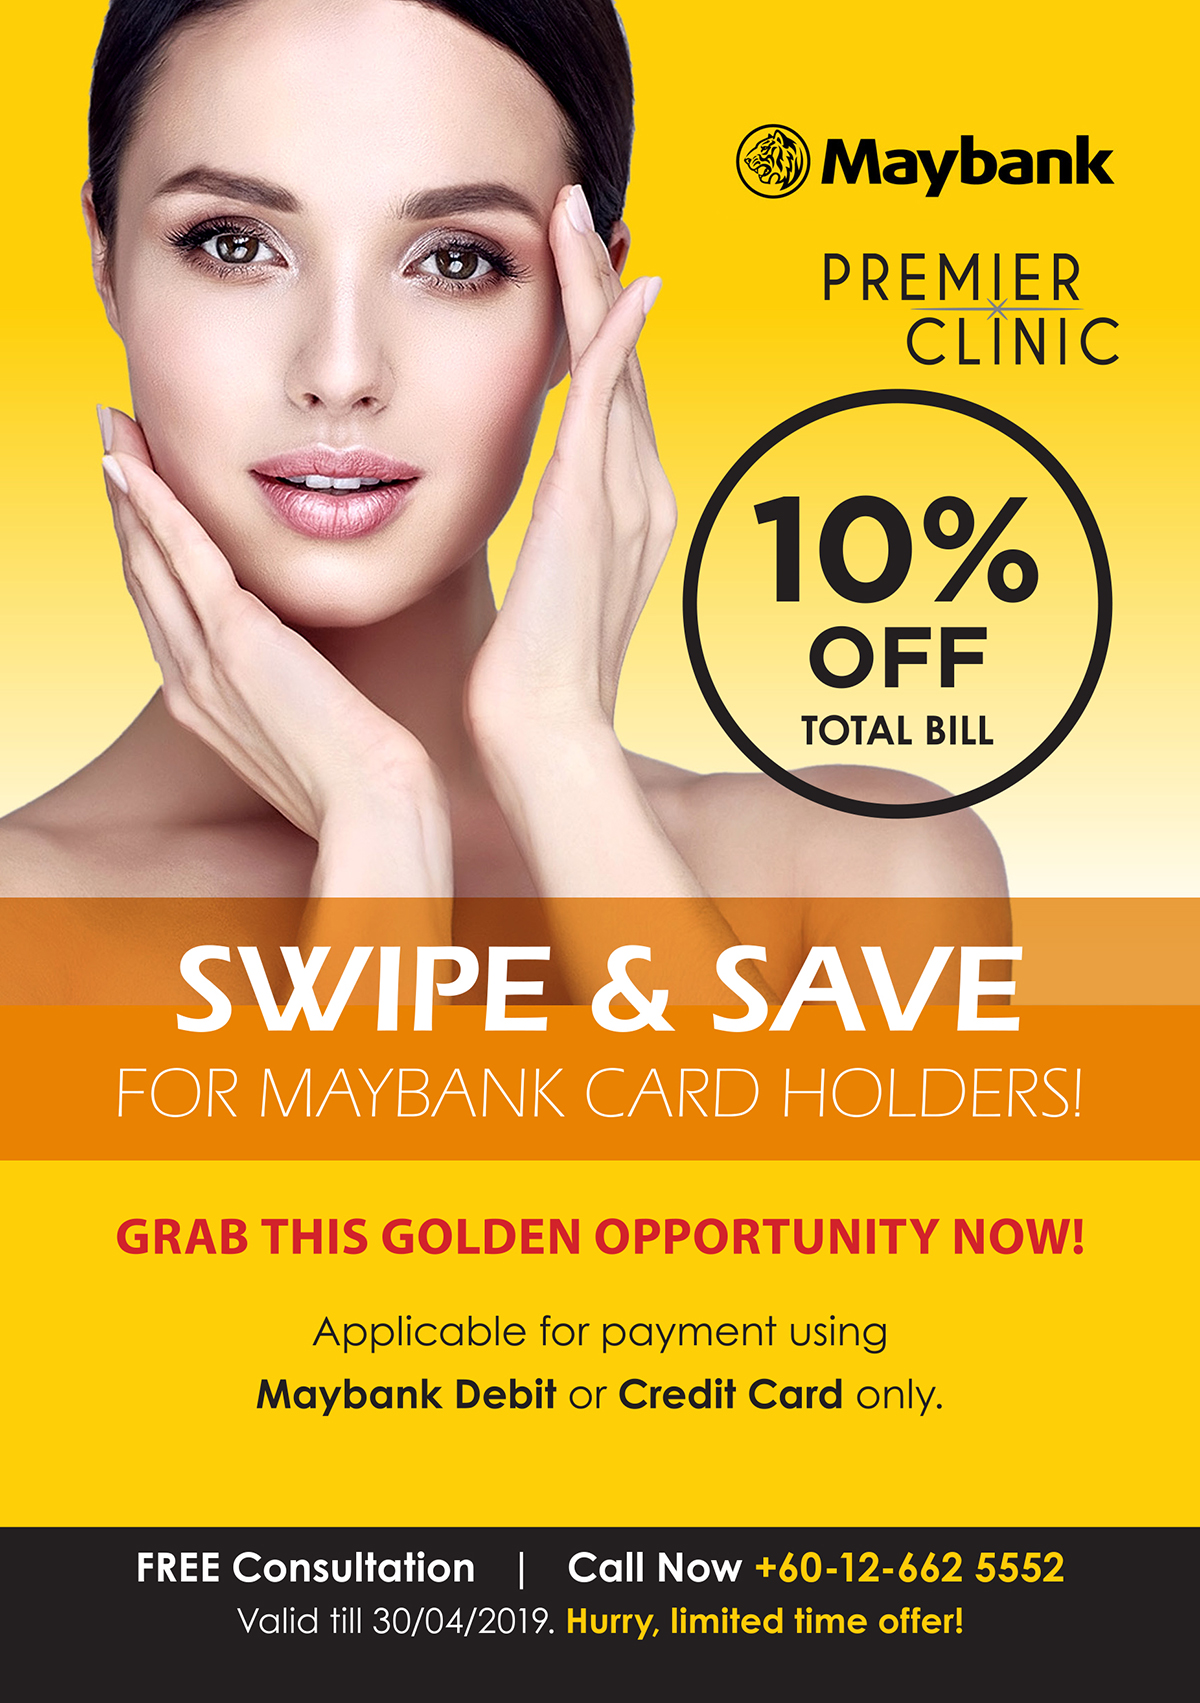 Maybank offer PREMIER CLINIC